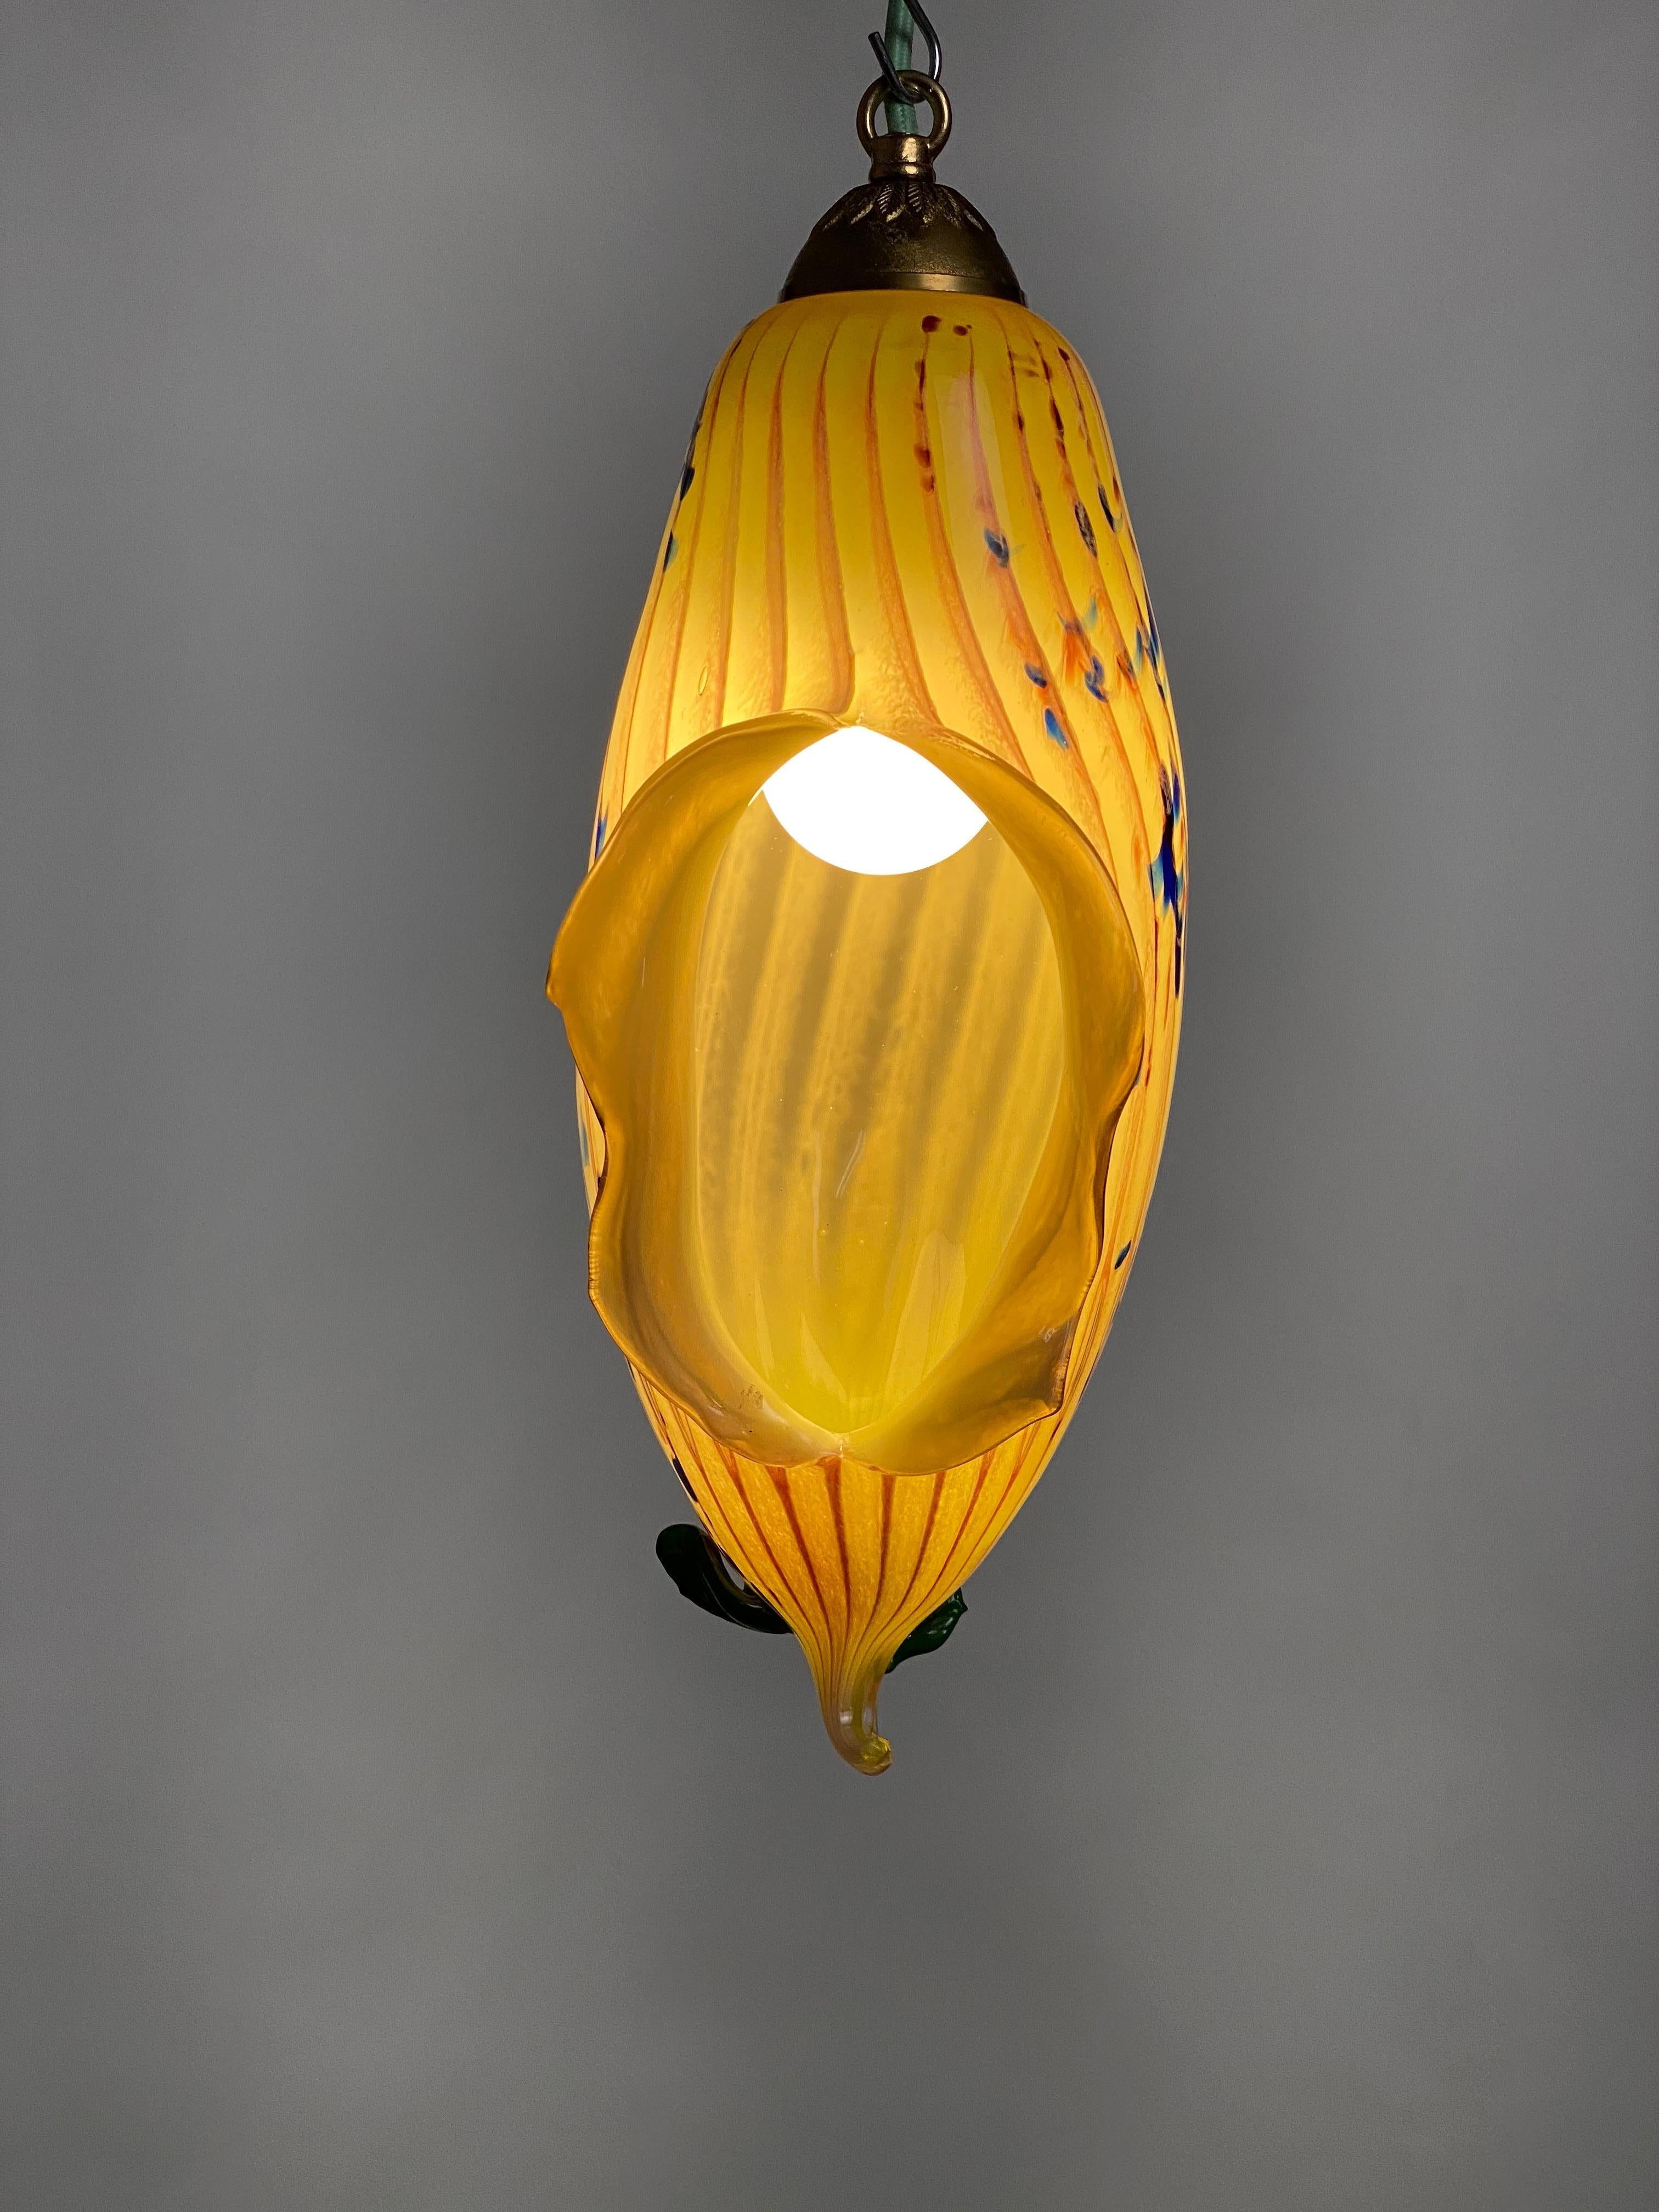 Blown Glass Yellow and Lamp Pendent Light, 21st Century by Mattia Biagi For Sale 7